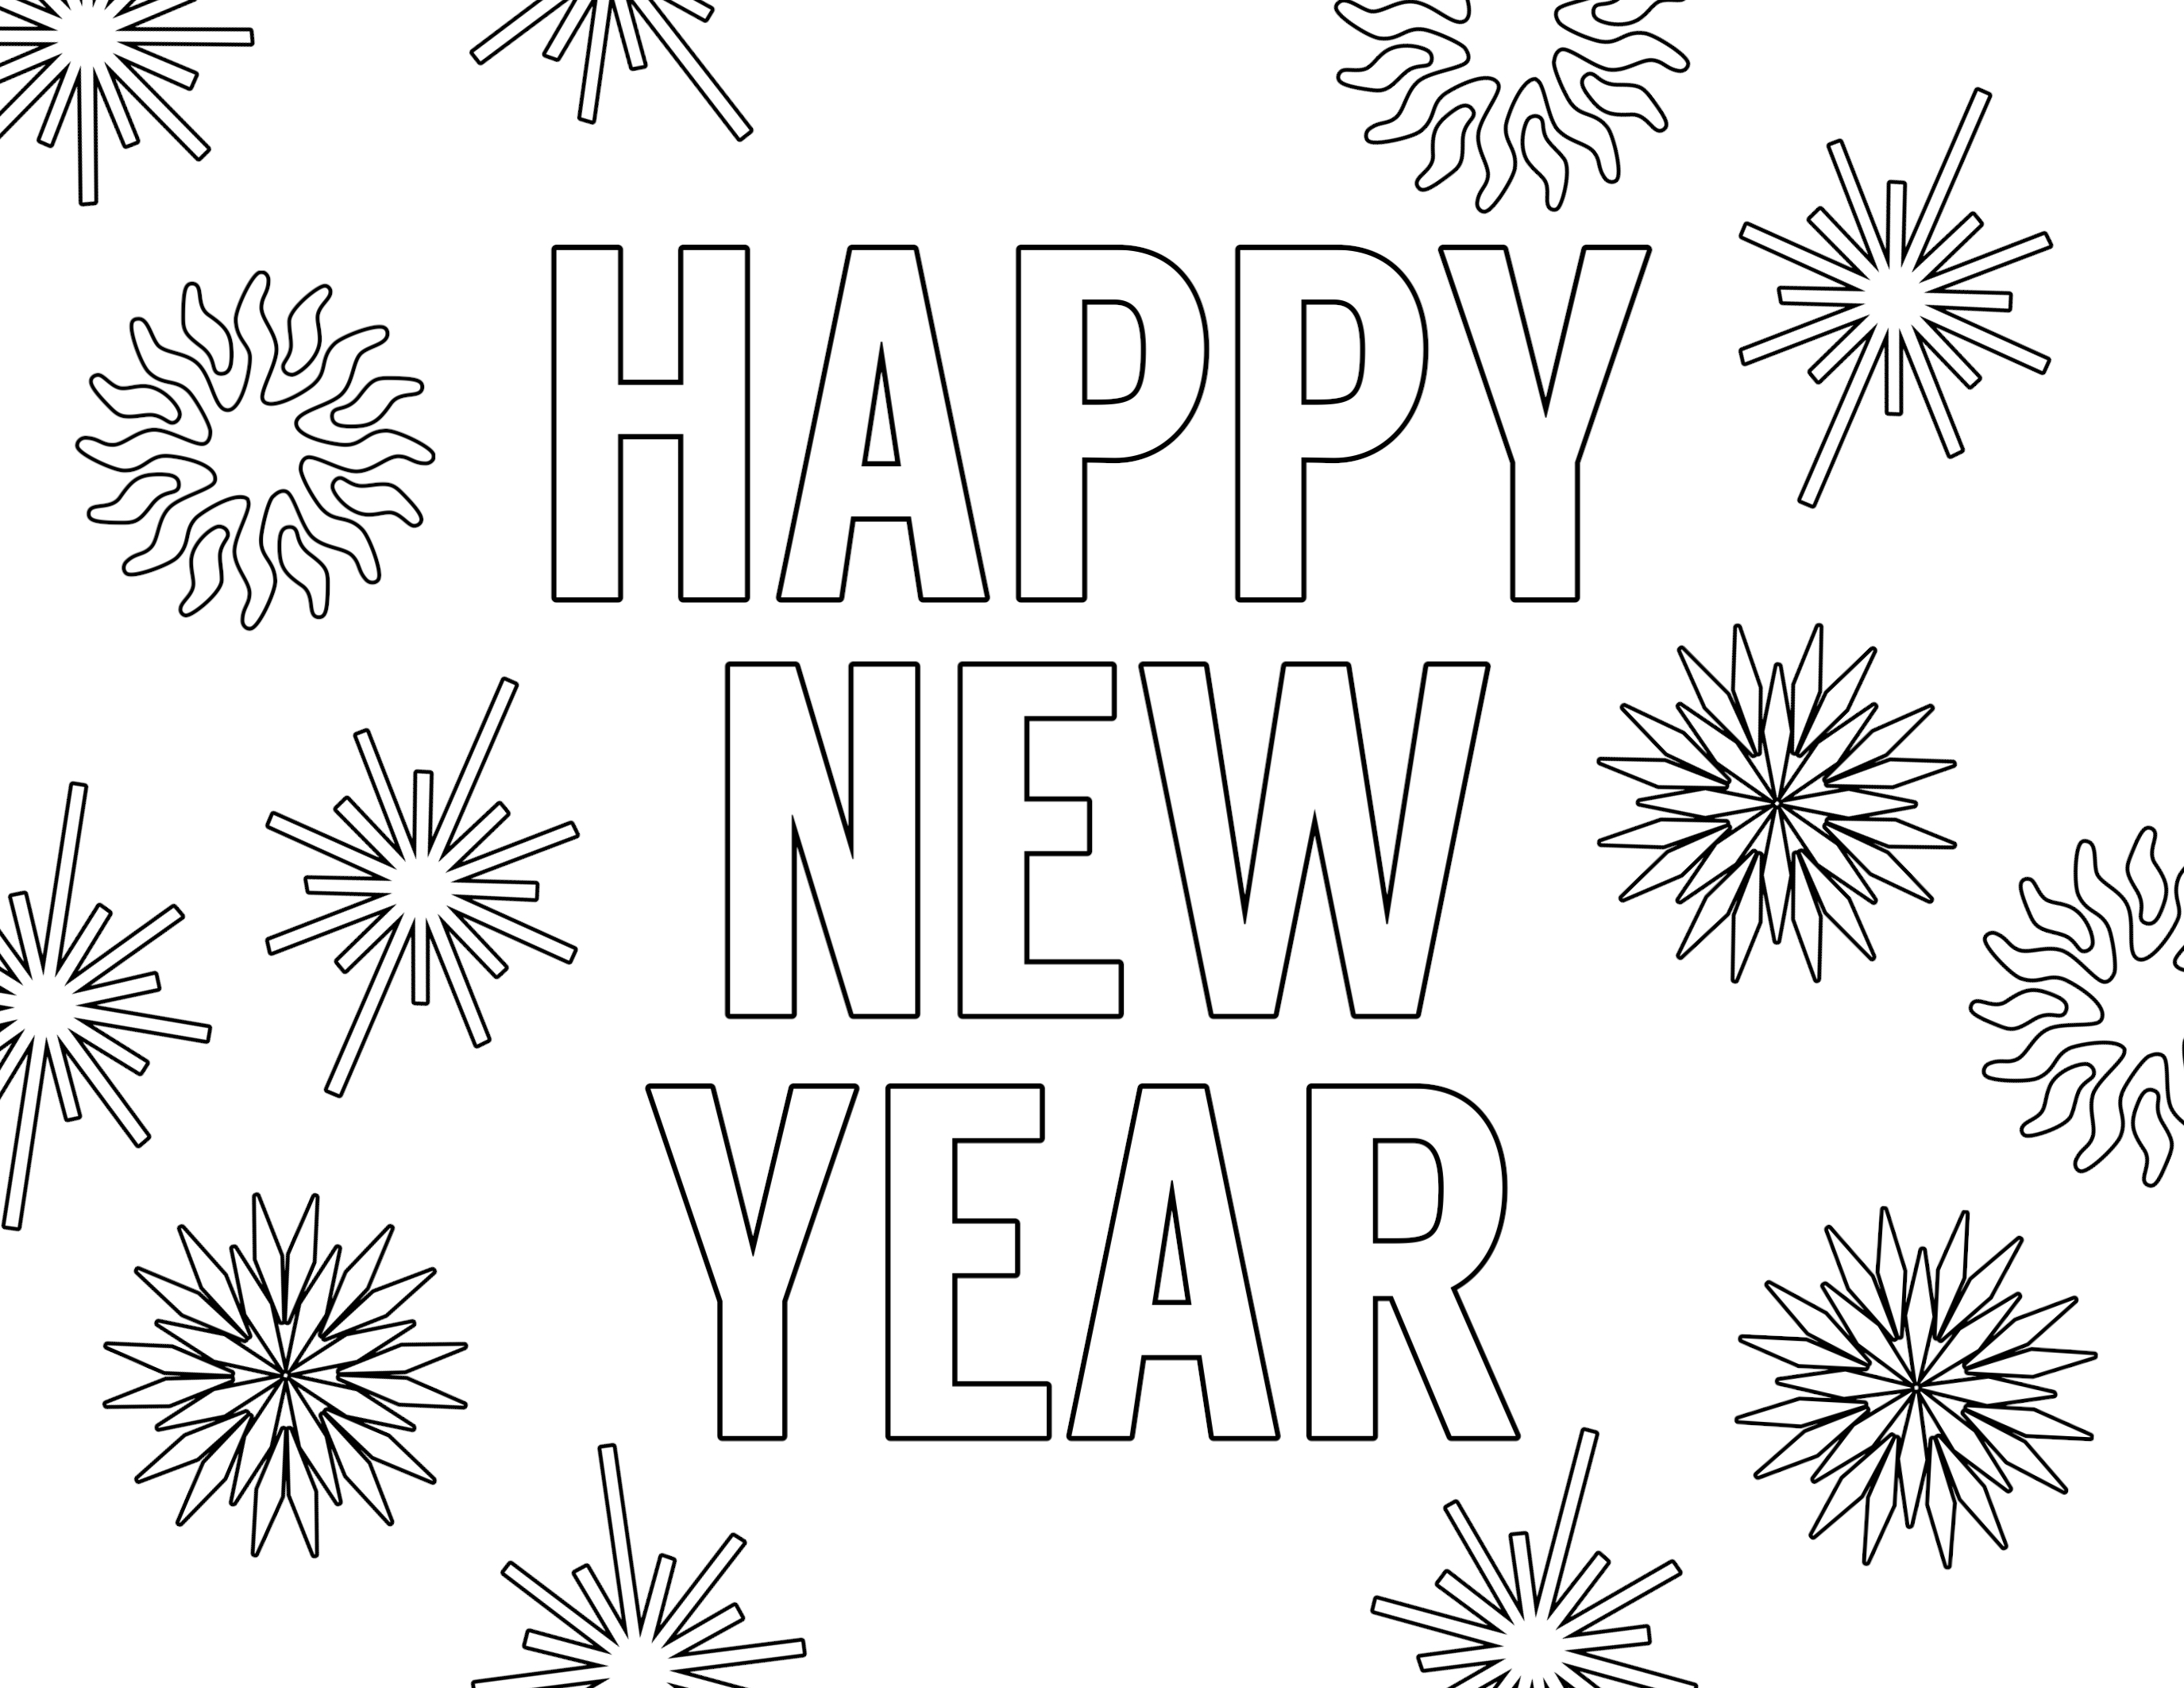 Download Happy New Year Coloring Pages Free Printable | Paper Trail Design